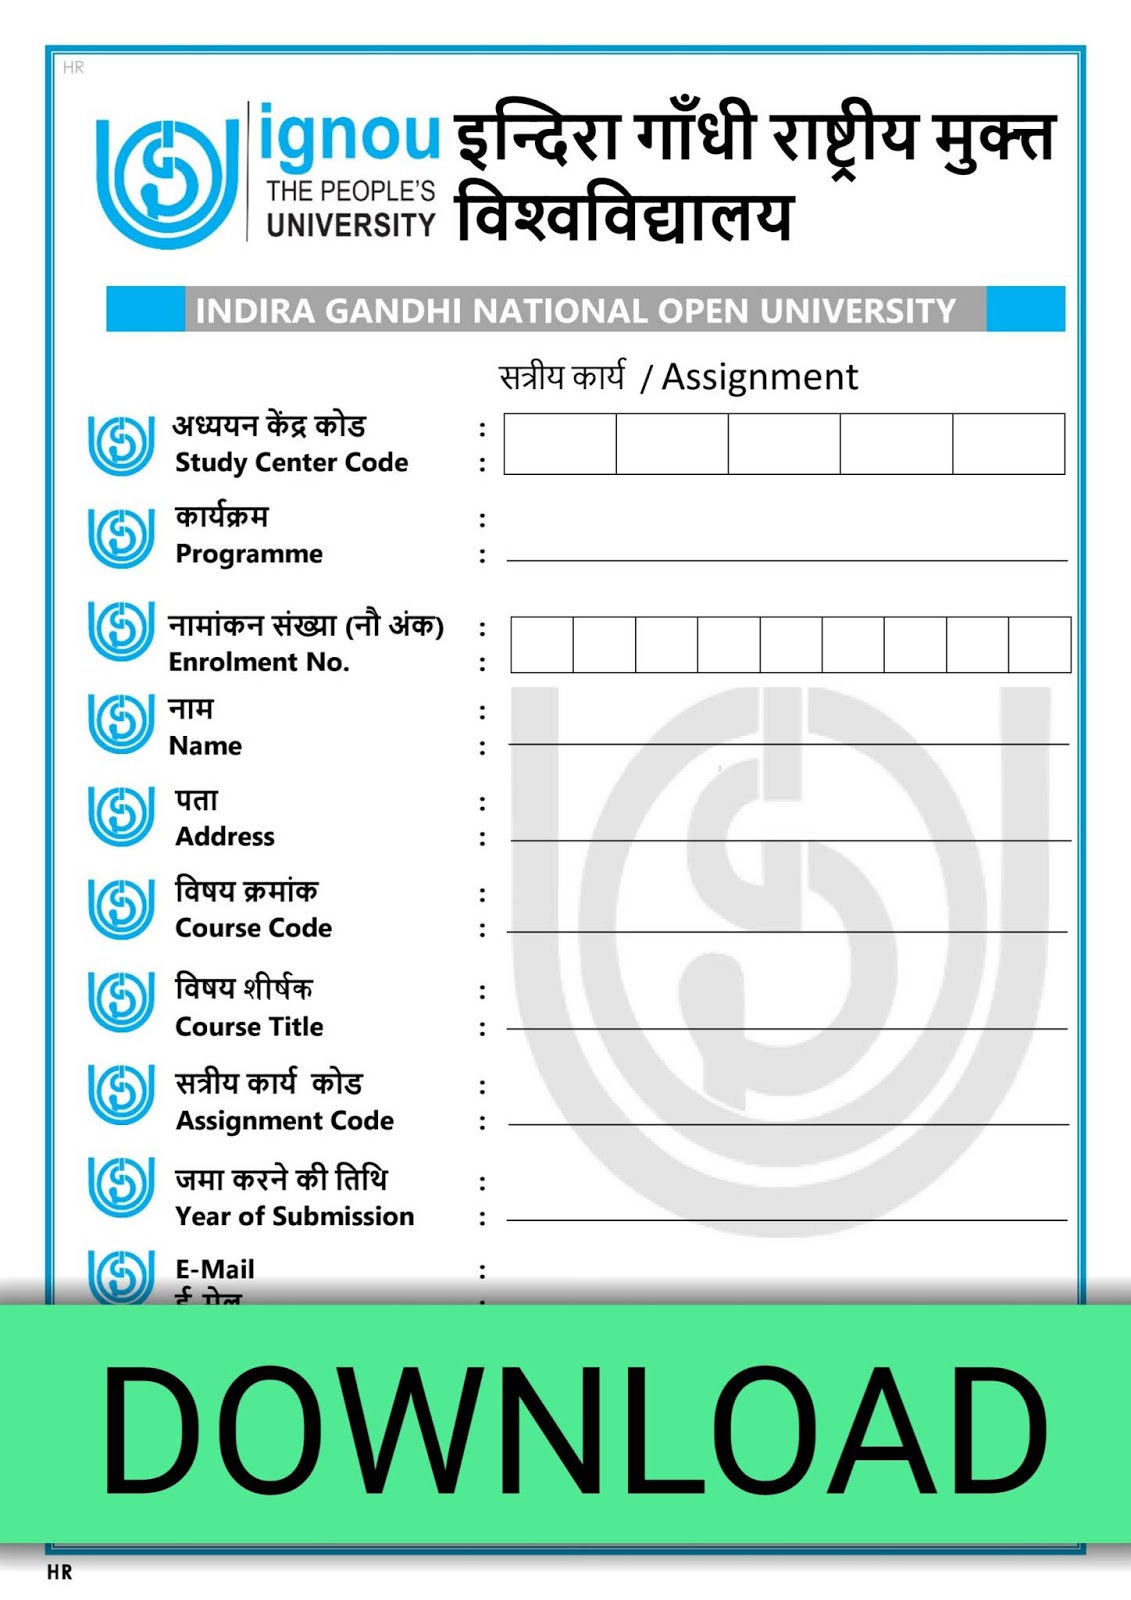 ignou assignment front page by tgn.pdf